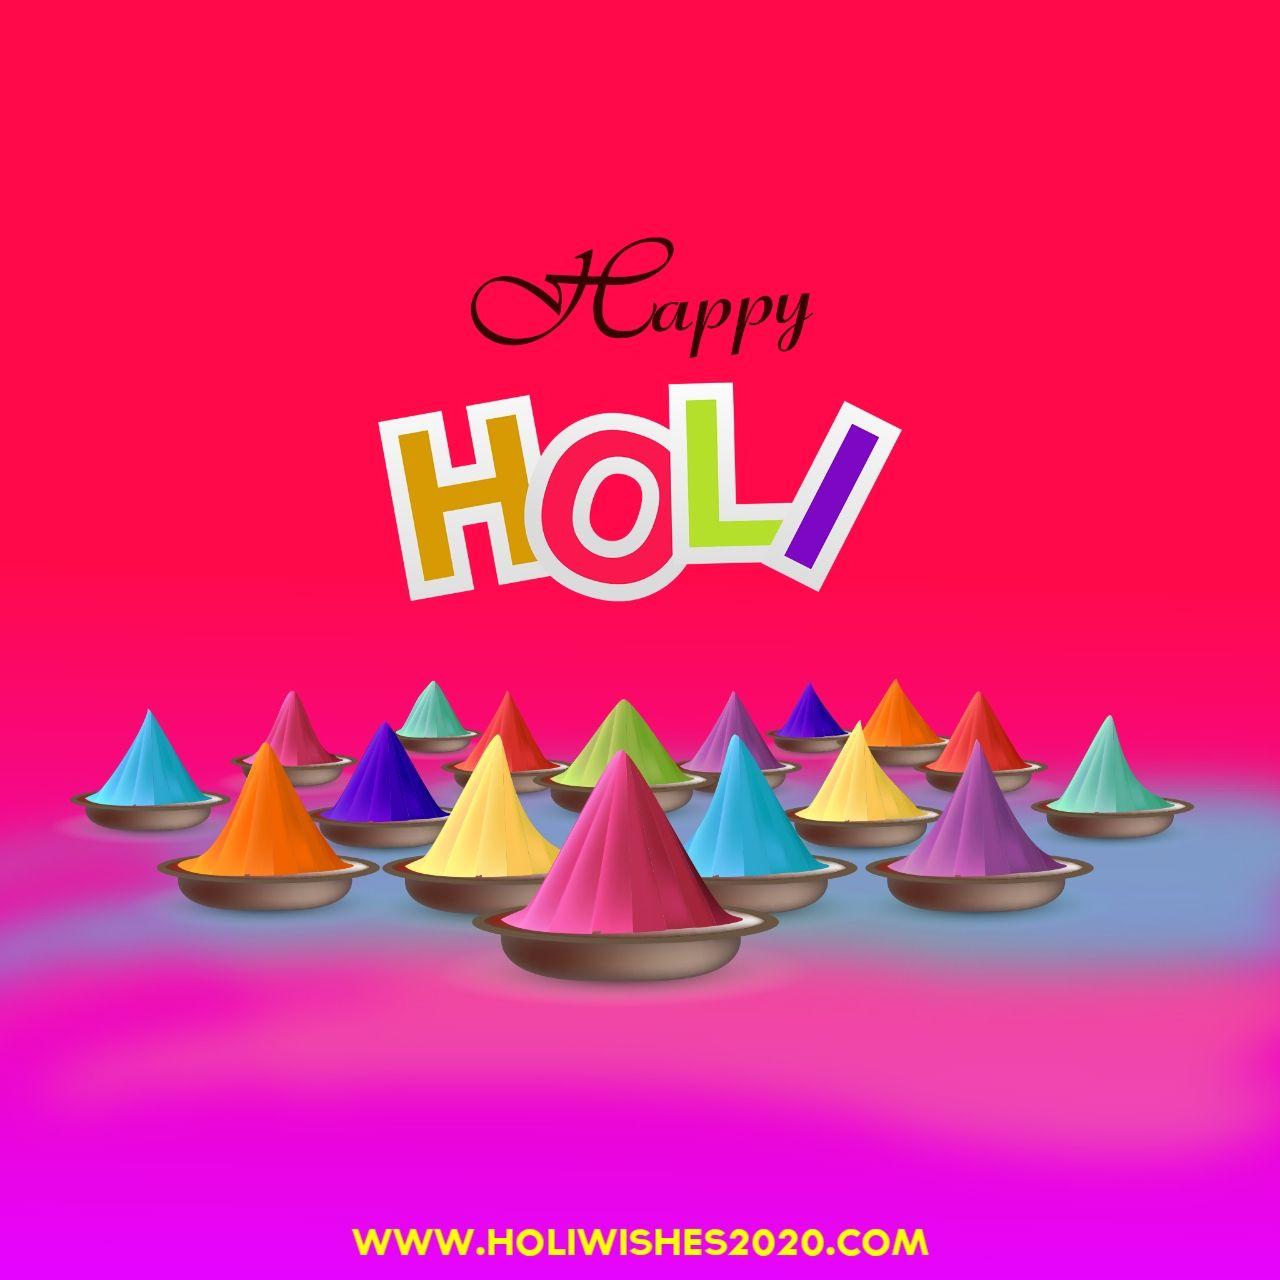 Happy Holi 2020 Wallpapers - Top Free Happy Holi 2020 Backgrounds ...